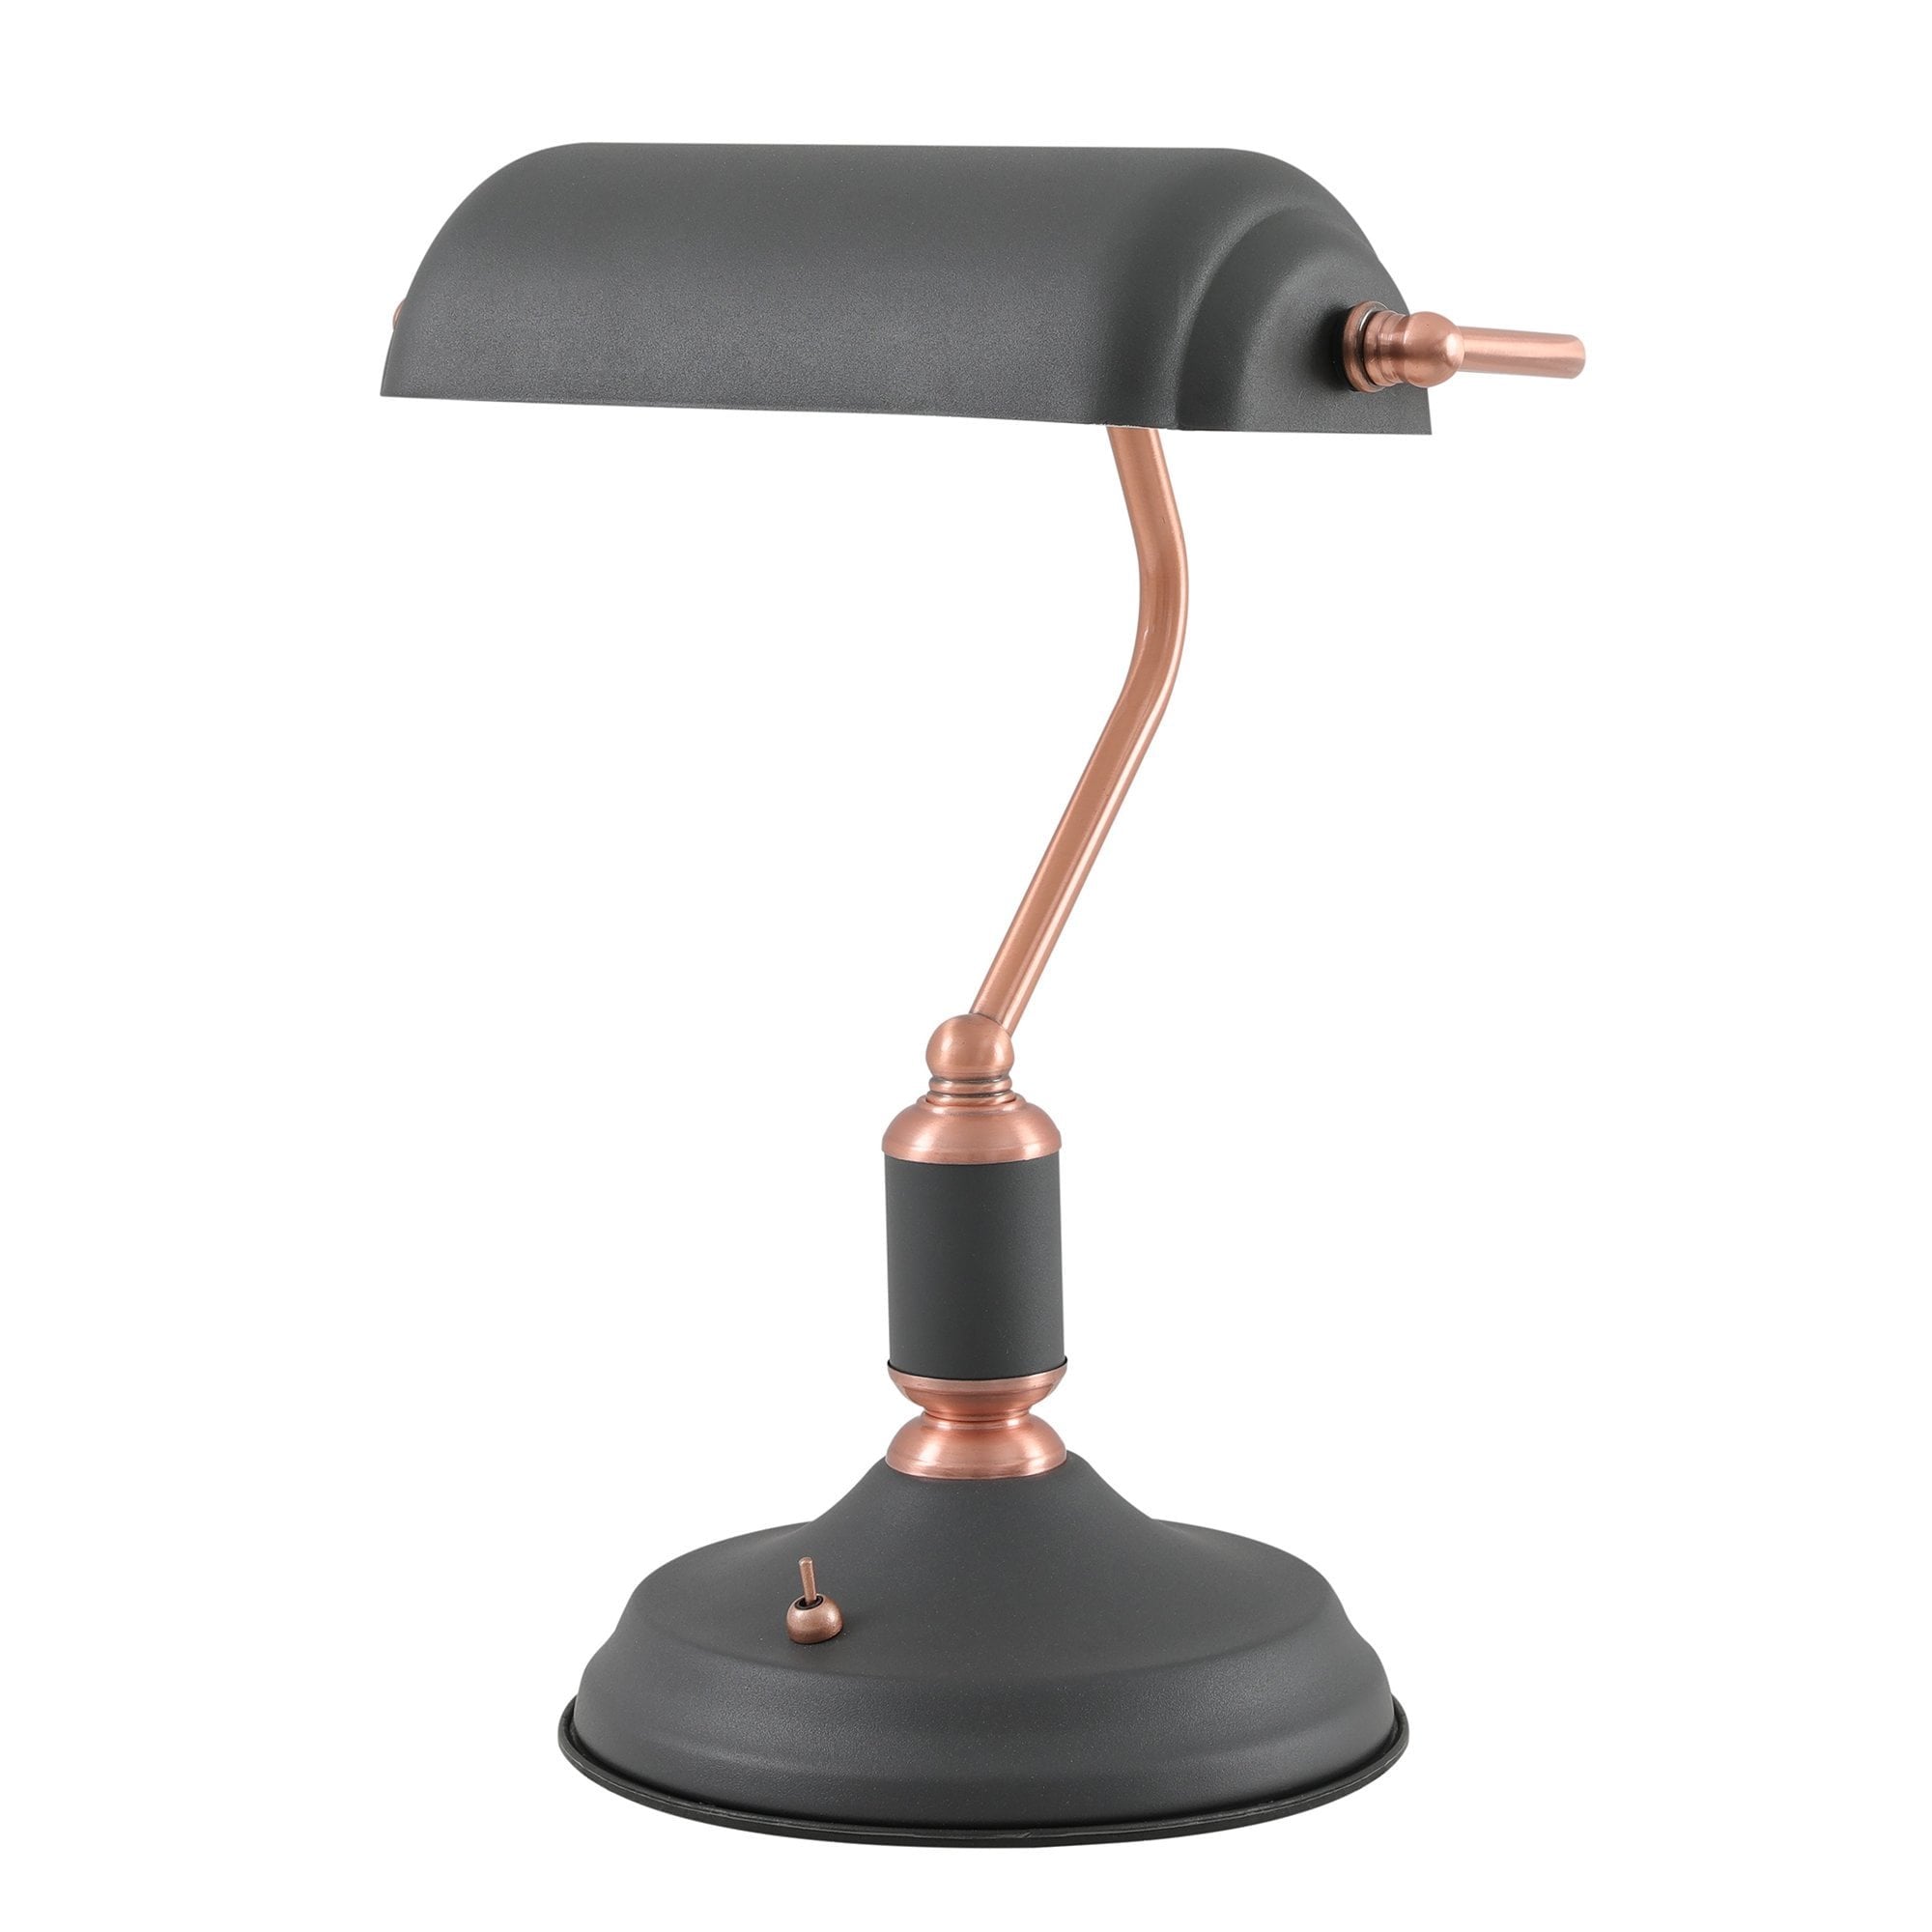 Table Lamp 1 Light With Toggle Switch, Sand Black/Copper